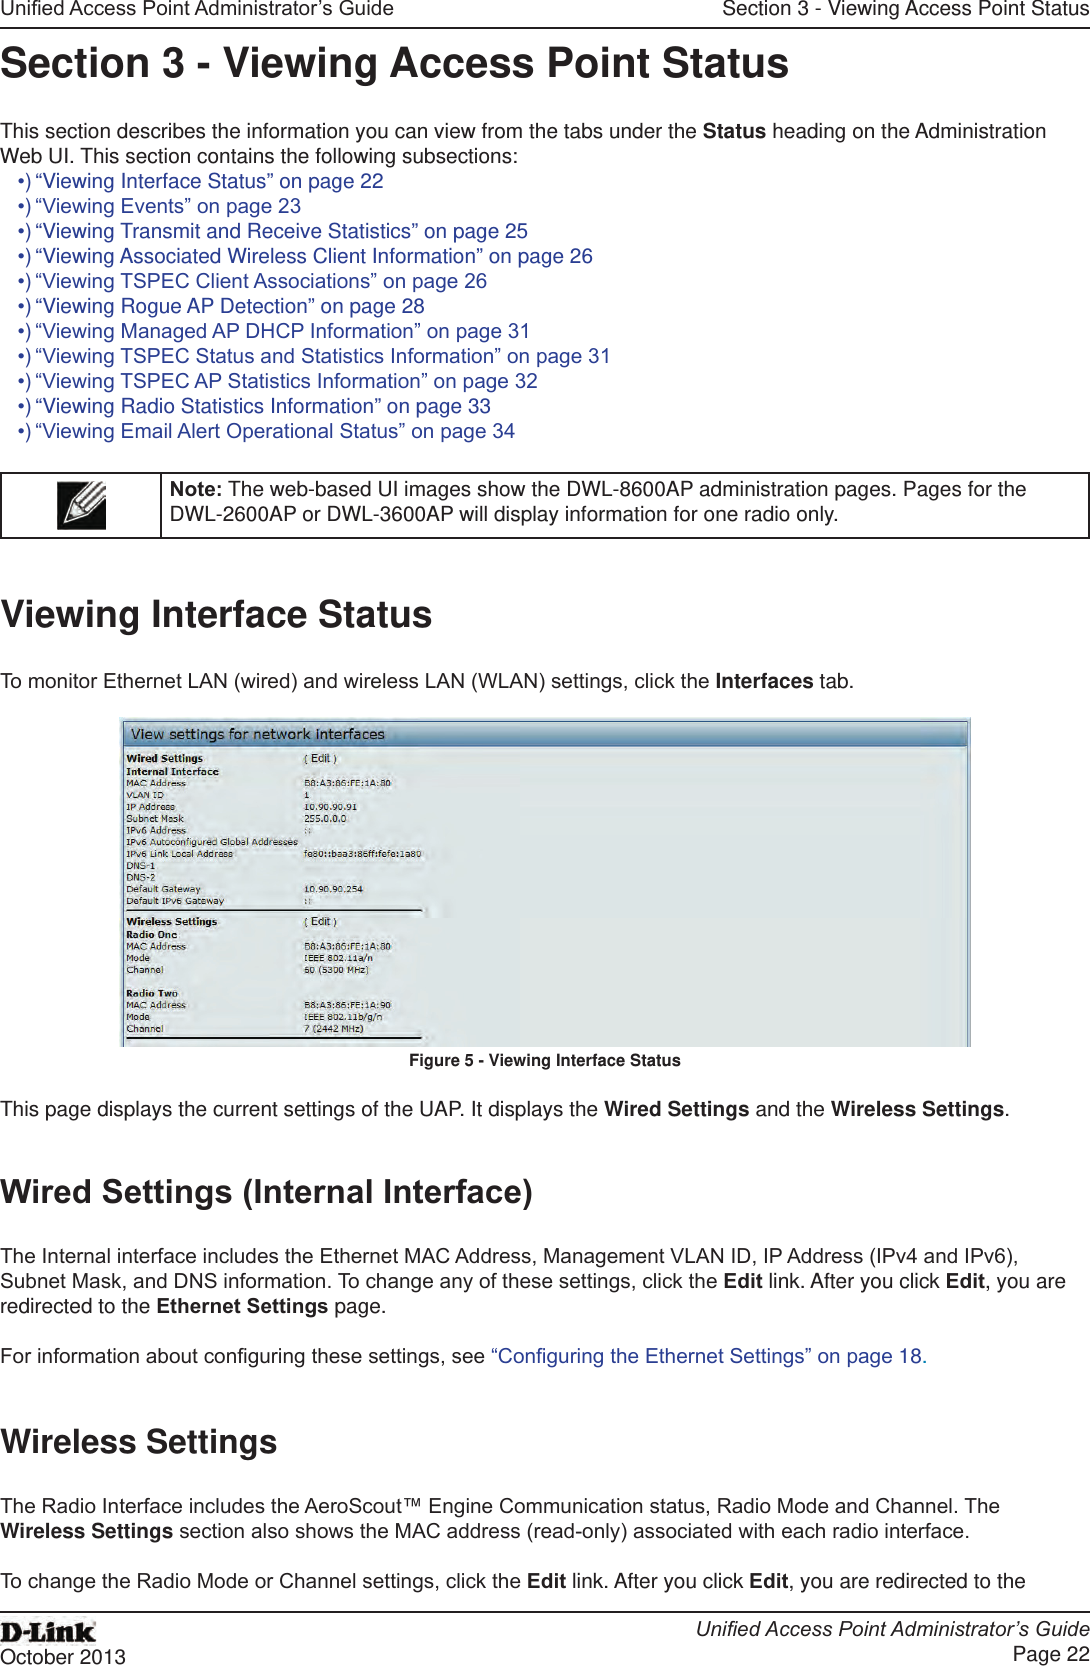 Unied Access Point Administrator’s GuideUnied Access Point Administrator’s GuidePage 22October 2013Section 3 - Viewing Access Point StatusSection 3 - Viewing Access Point StatusThis section describes the information you can view from the tabs under the Status heading on the Administration Web UI. This section contains the following subsections:•) “Viewing Interface Status” on page 22•) “Viewing Events” on page 23•) “Viewing Transmit and Receive Statistics” on page 25•) “Viewing Associated Wireless Client Information” on page 26•) “Viewing TSPEC Client Associations” on page 26•) “Viewing Rogue AP Detection” on page 28•) “Viewing Managed AP DHCP Information” on page 31•) “Viewing TSPEC Status and Statistics Information” on page 31•) “Viewing TSPEC AP Statistics Information” on page 32•) “Viewing Radio Statistics Information” on page 33•) “Viewing Email Alert Operational Status” on page 34Note: The web-based UI images show the DWL-8600AP administration pages. Pages for the DWL-2600AP or DWL-3600AP will display information for one radio only.Viewing Interface StatusTo monitor Ethernet LAN (wired) and wireless LAN (WLAN) settings, click the Interfaces tab.Figure 5 - Viewing Interface StatusThis page displays the current settings of the UAP. It displays the Wired Settings and the Wireless Settings.Wired Settings (Internal Interface)The Internal interface includes the Ethernet MAC Address, Management VLAN ID, IP Address (IPv4 and IPv6), Subnet Mask, and DNS information. To change any of these settings, click the Edit link. After you click Edit, you are redirected to the Ethernet Settings page.For information about conguring these settings, see “Conguring the Ethernet Settings” on page 18.Wireless SettingsThe Radio Interface includes the AeroScout™ Engine Communication status, Radio Mode and Channel. The Wireless Settings section also shows the MAC address (read-only) associated with each radio interface. To change the Radio Mode or Channel settings, click the Edit link. After you click Edit, you are redirected to the 